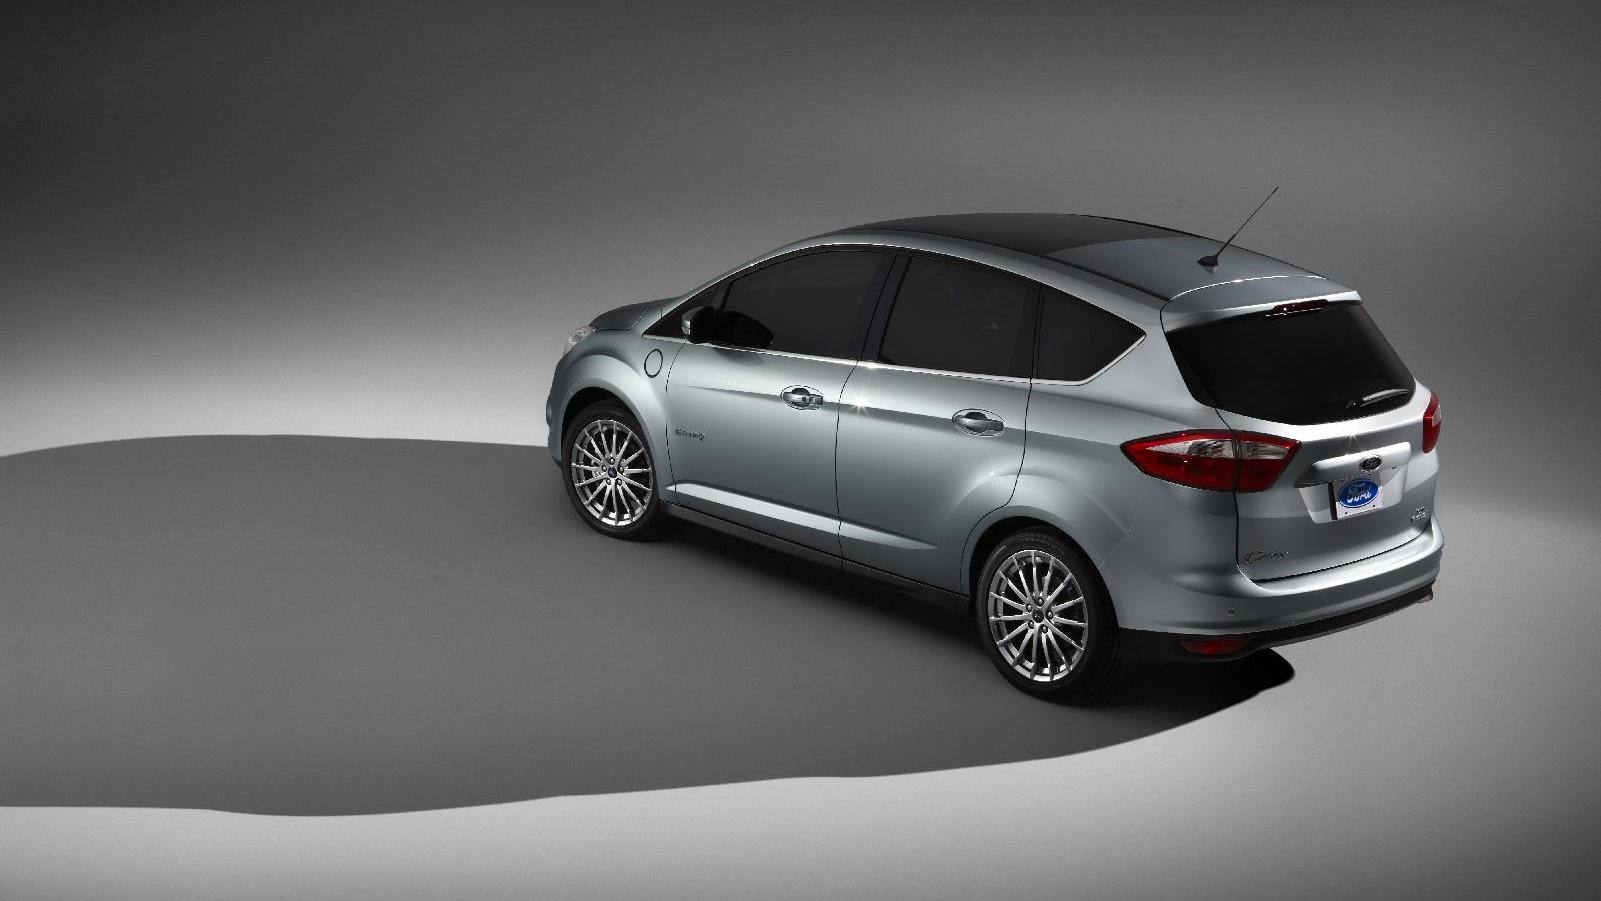 Ford C-Max Energi, first revealed at the 2011 Detroit Auto Show